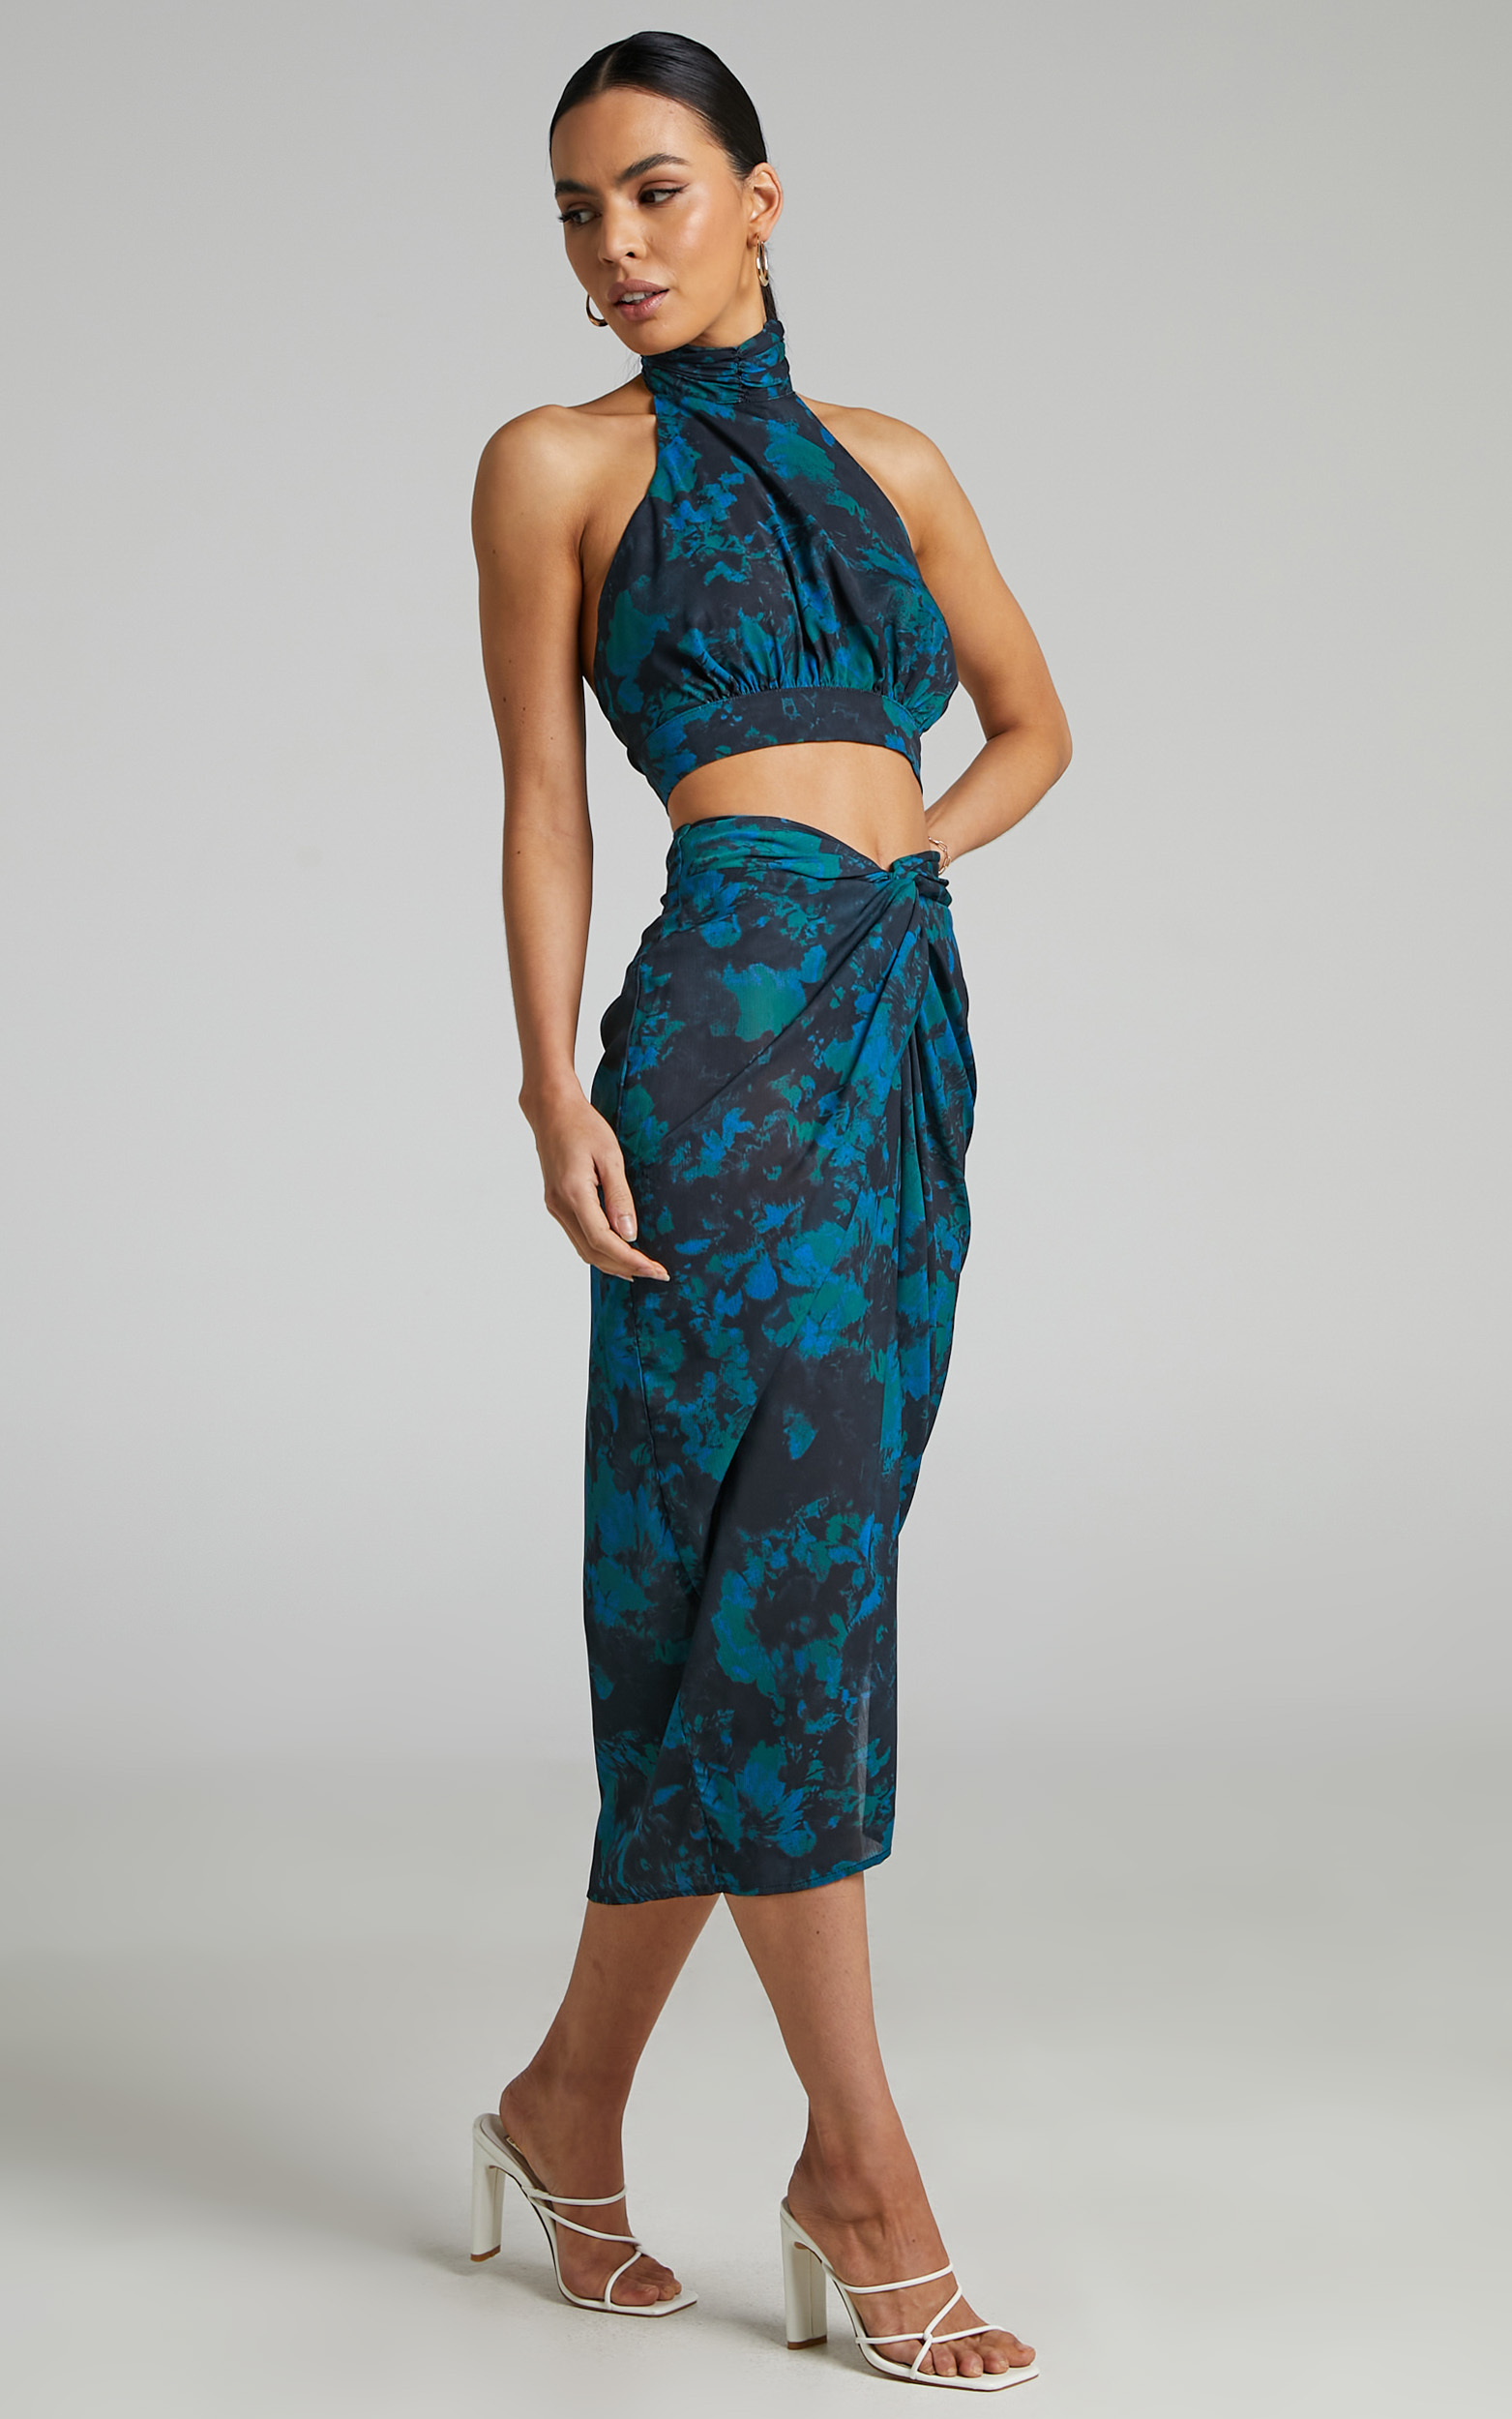 Mirski High Neck Halter Top and Twist Front Midi Skirt Two Piece Set in Jewel Blur - 04, GRN1, hi-res image number null